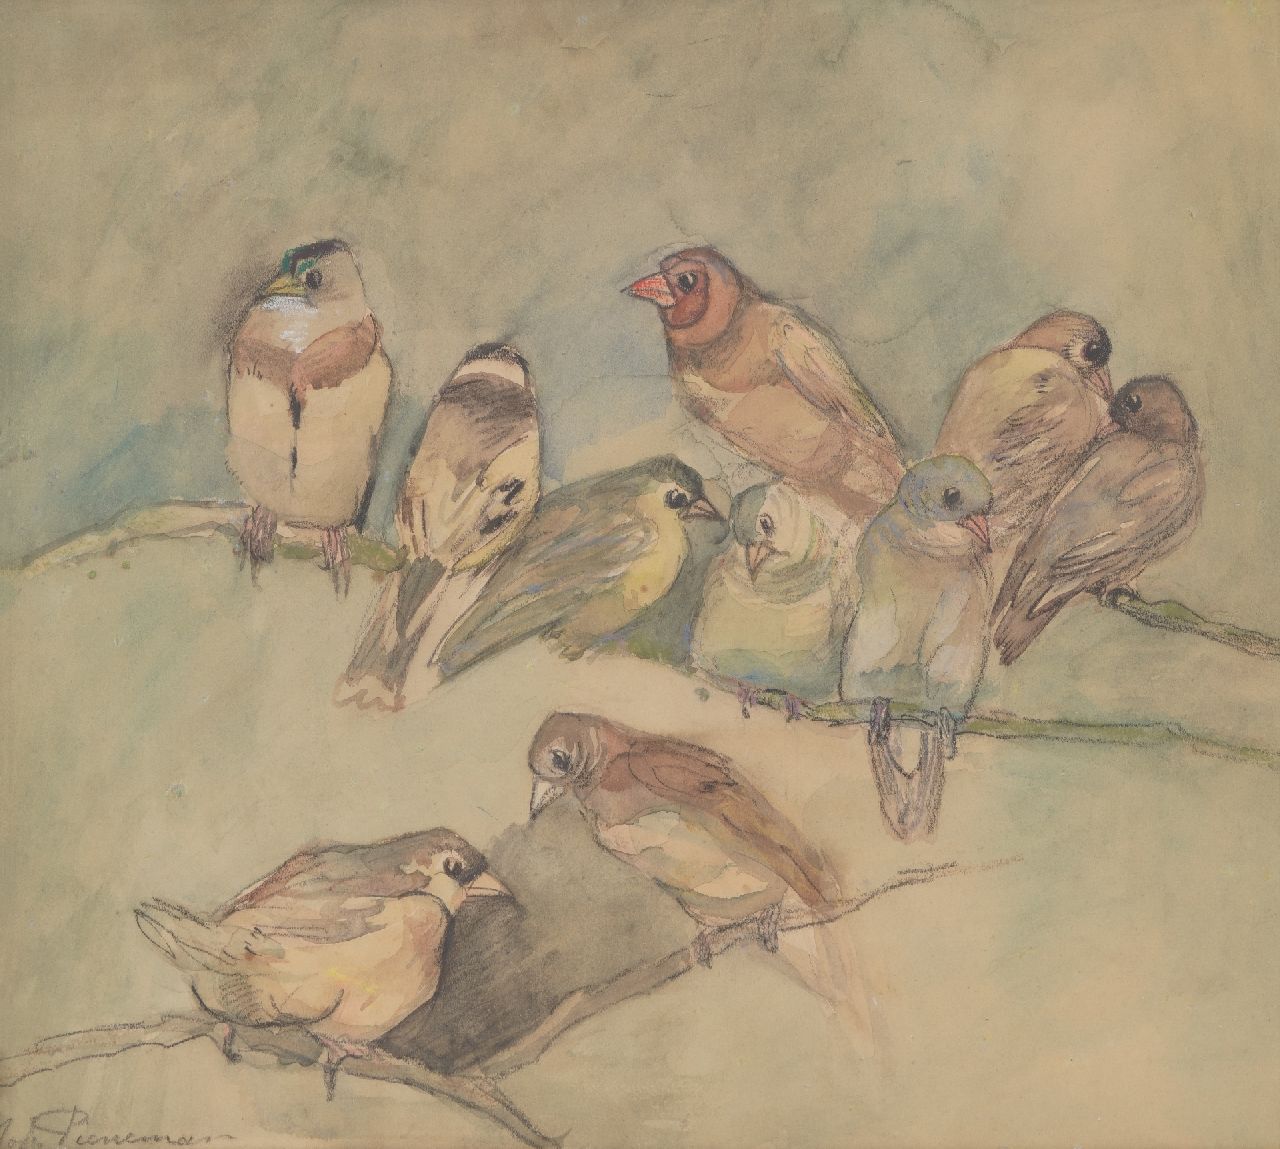 Pieneman J.H.  | 'Johanna' Hendrika Pieneman | Watercolours and drawings offered for sale | Finches, black chalk and watercolour on paper 30.3 x 33.5 cm, signed l.l.